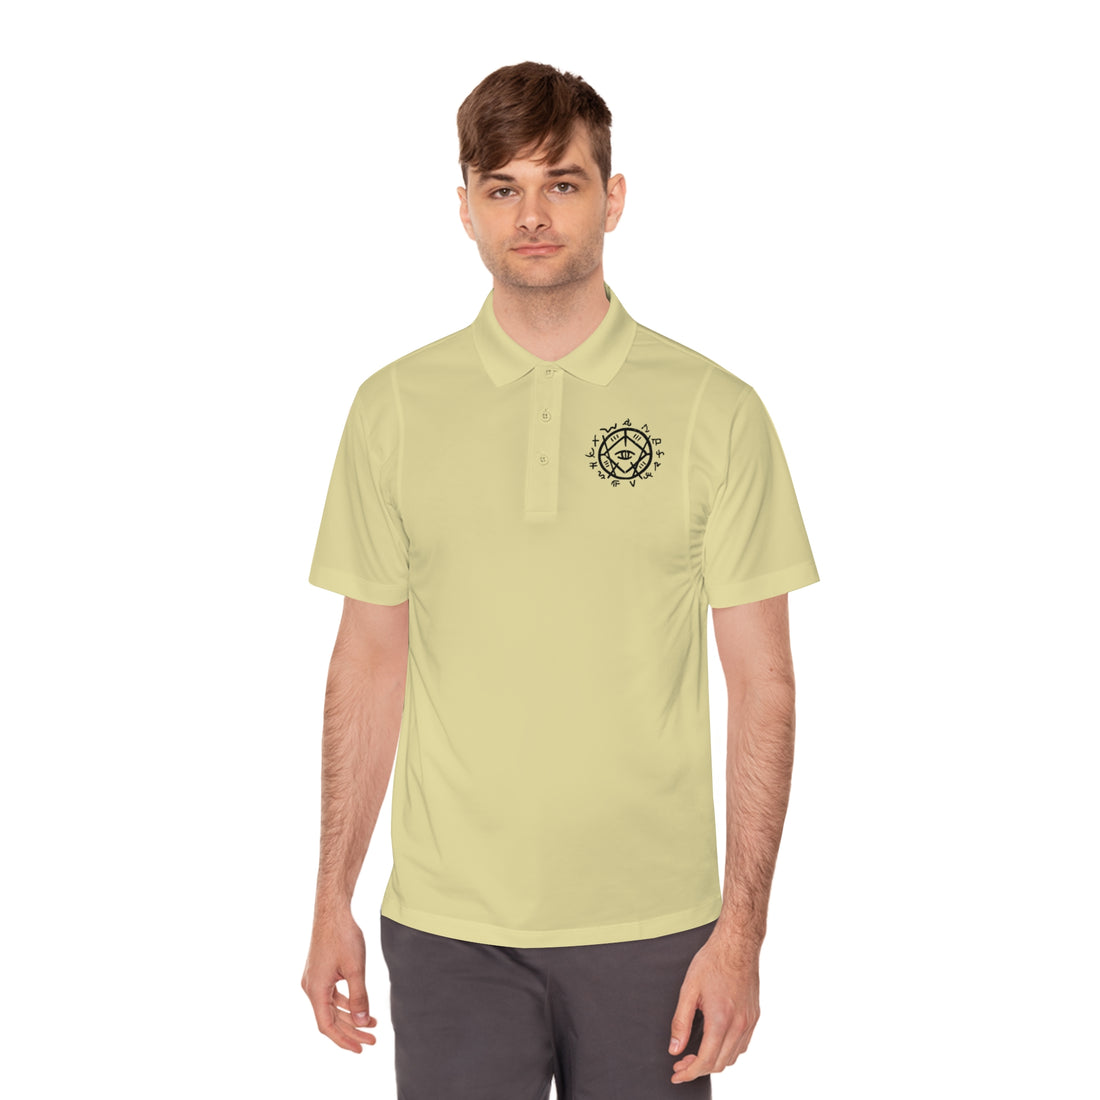 Scared to Death Polo Shirt